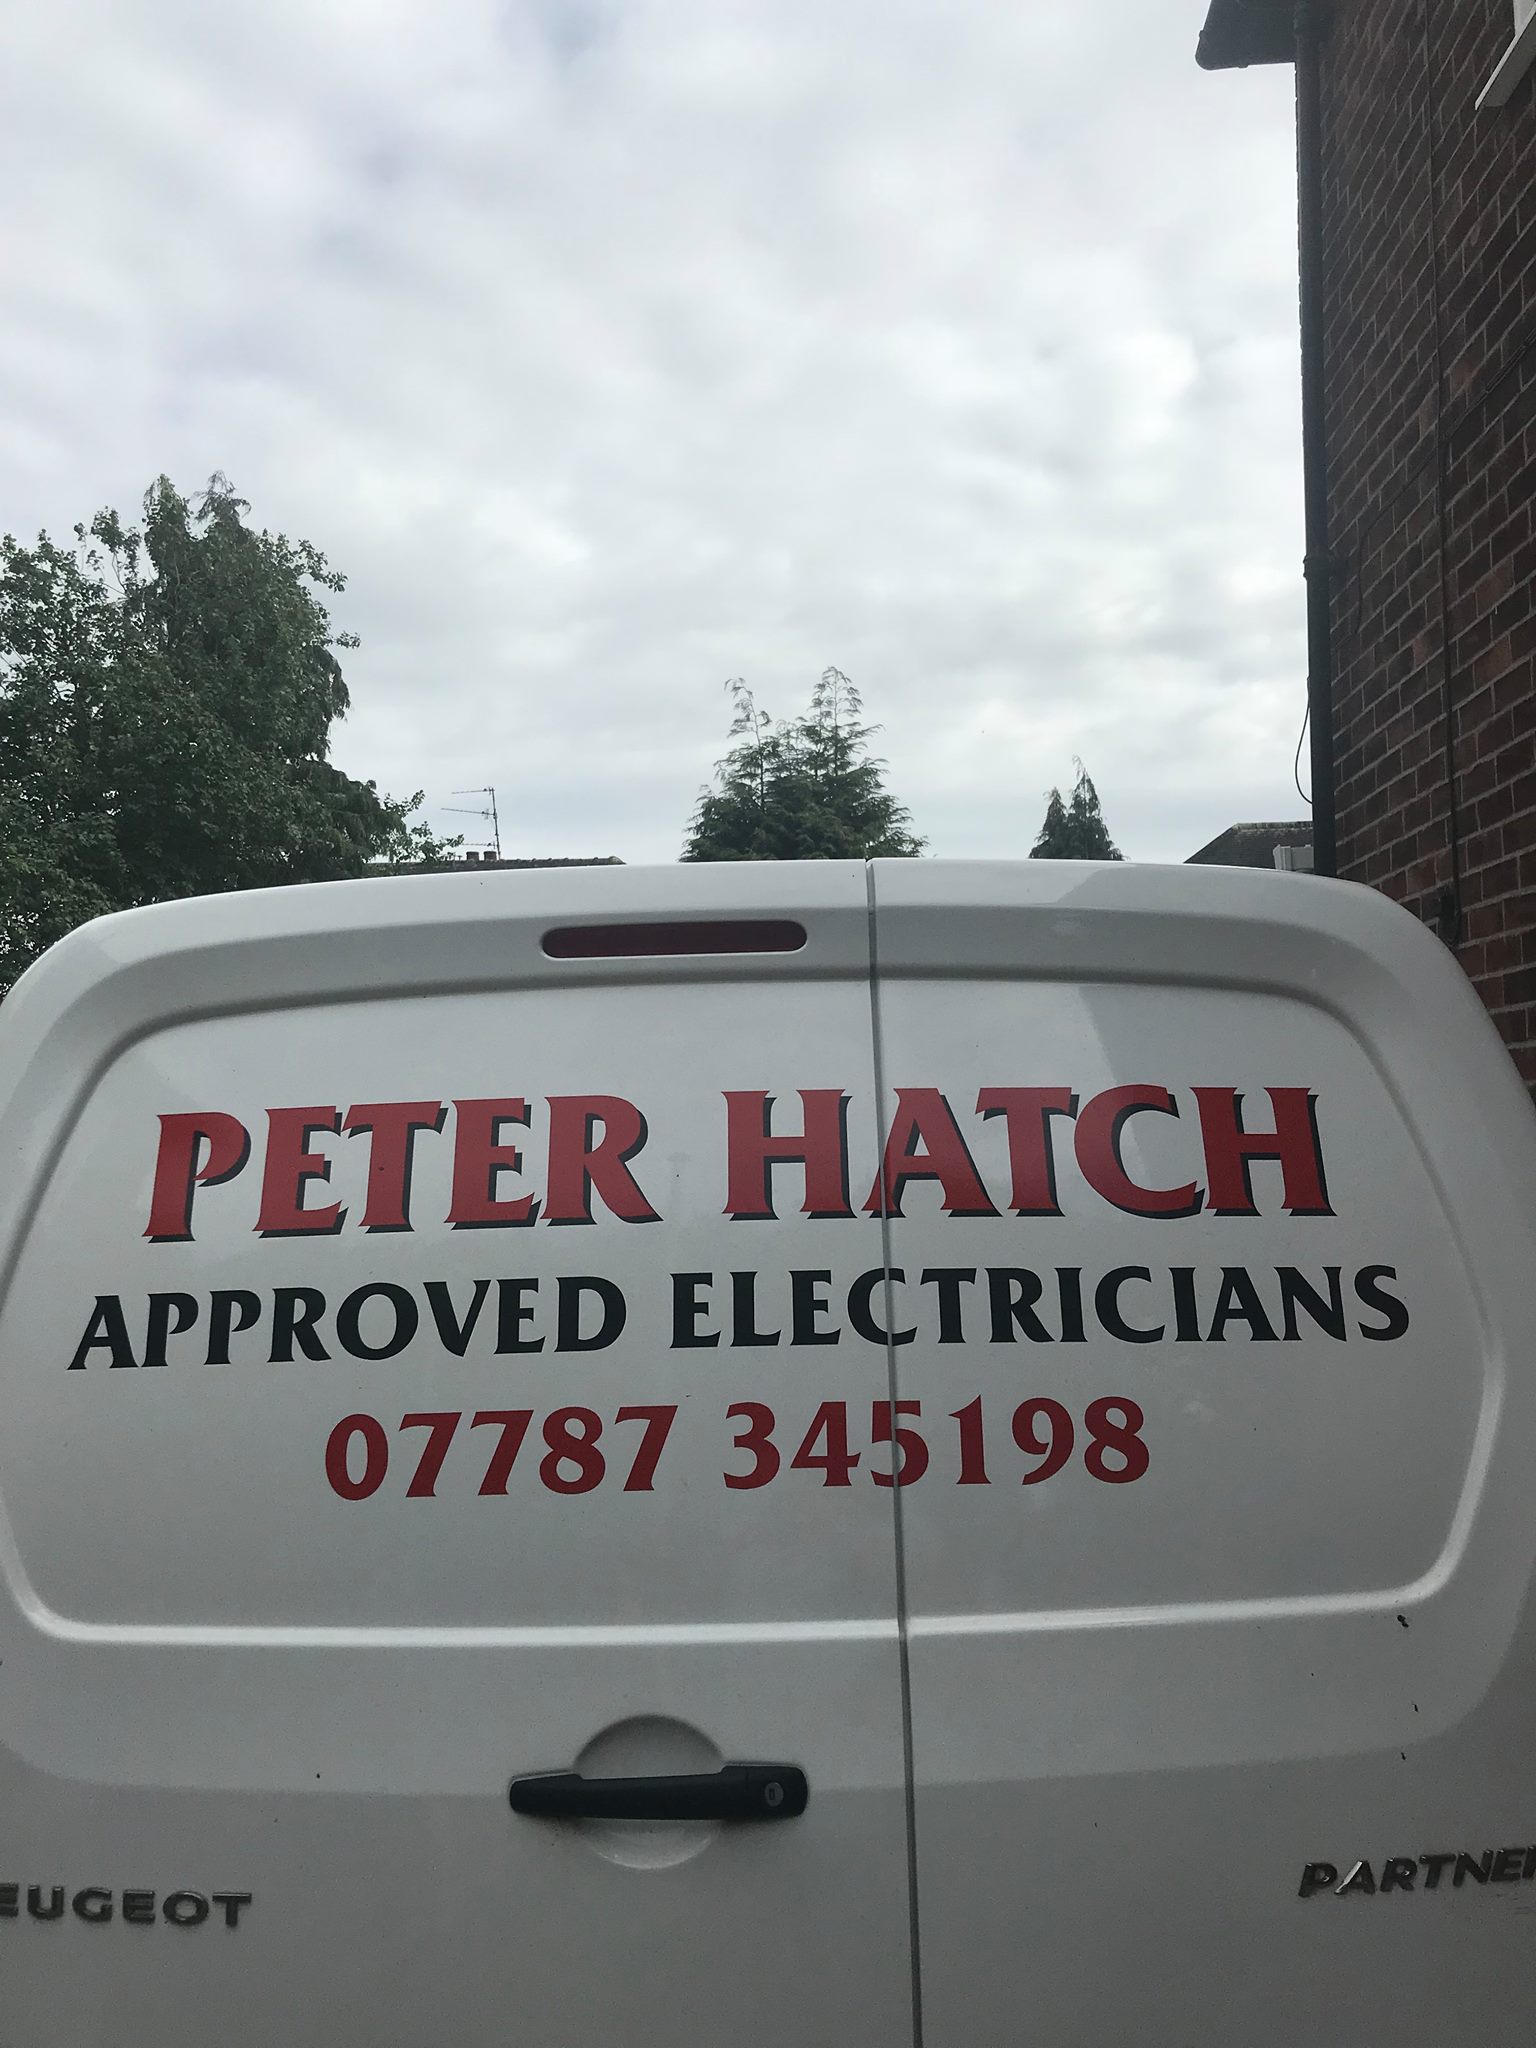 Approved Electricians